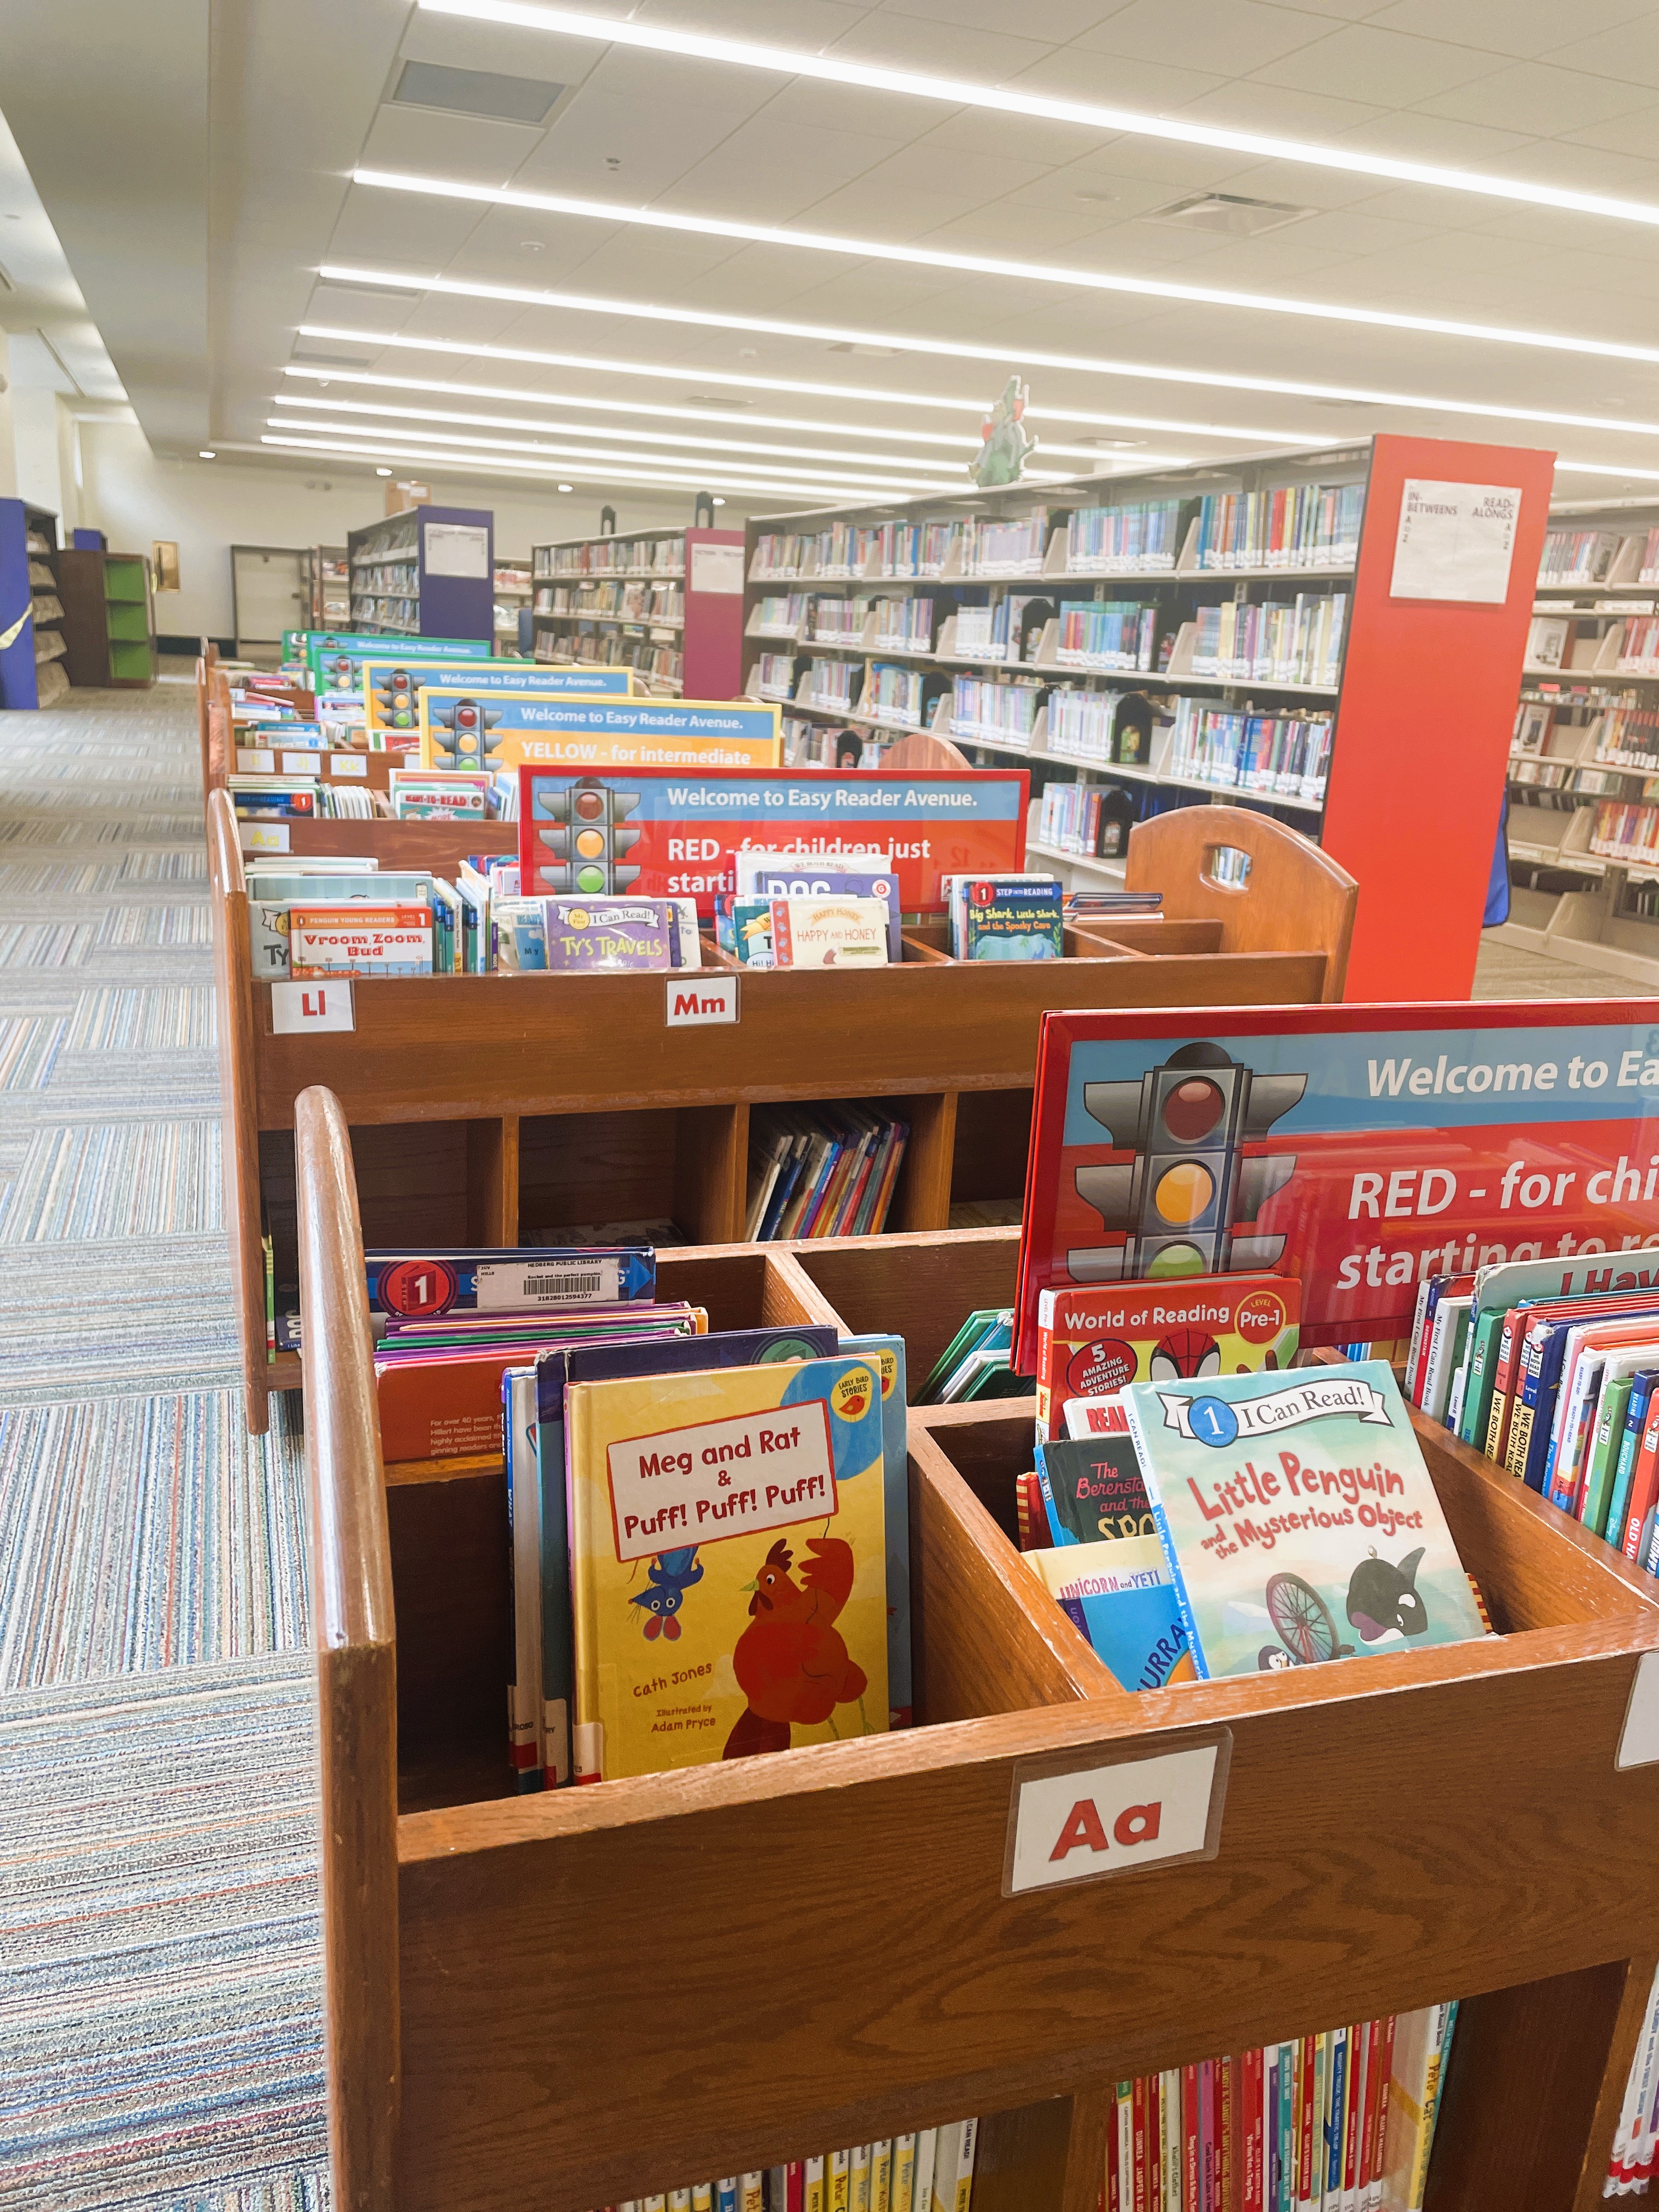 View of Easy Reader Collection in Children's Room